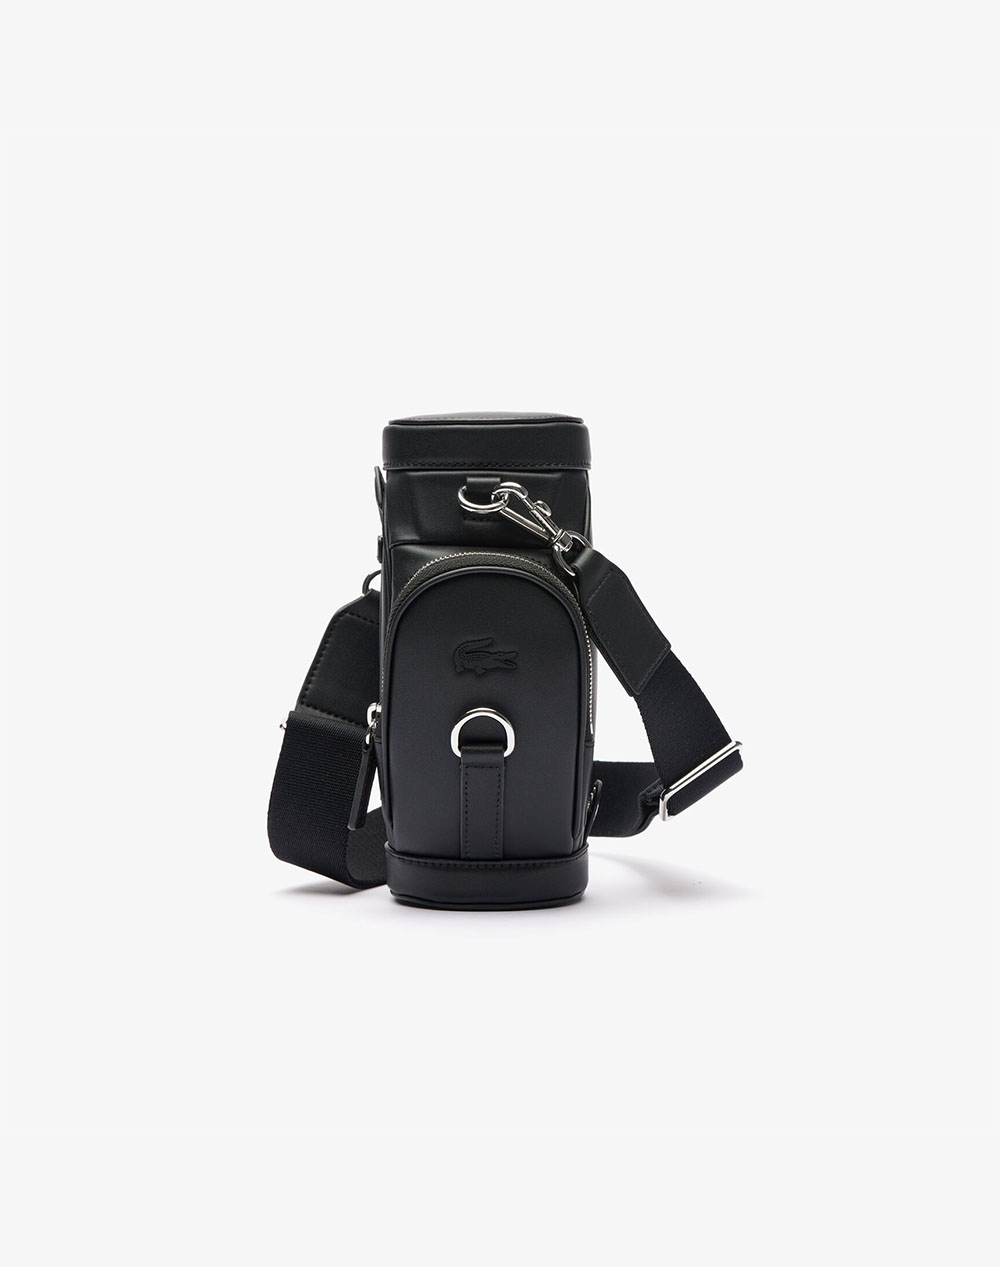 LACOSTE ΤΣΑΝΤΑ XS CROSSOVER BAG 3NF4616MD-000 Black 3810BLACO6210171_20103